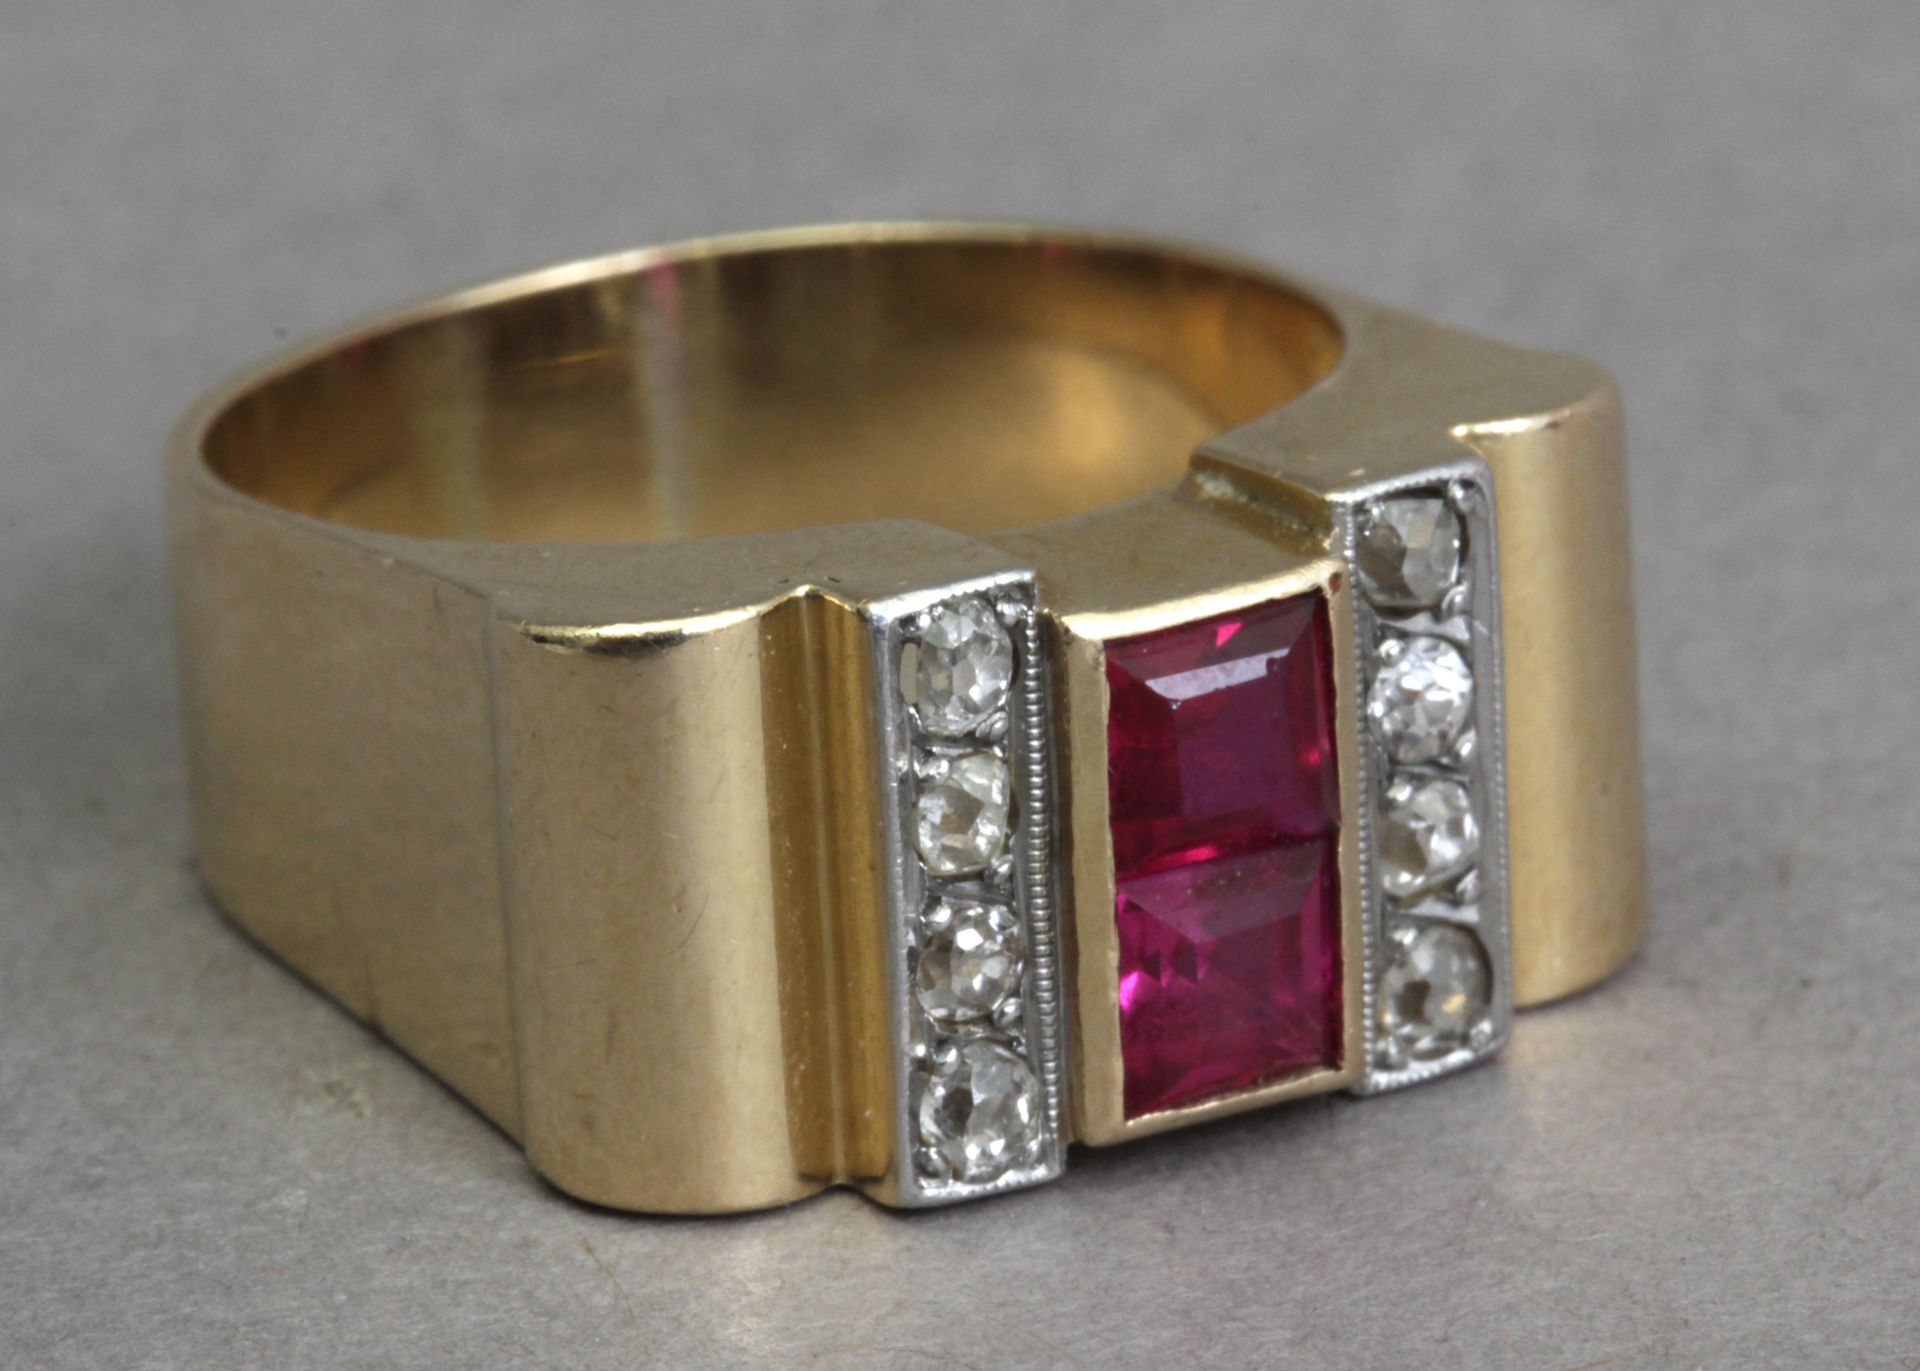 A chevalier ring circa 1940 in gold, platinum, diamonds and rubies - Image 4 of 6